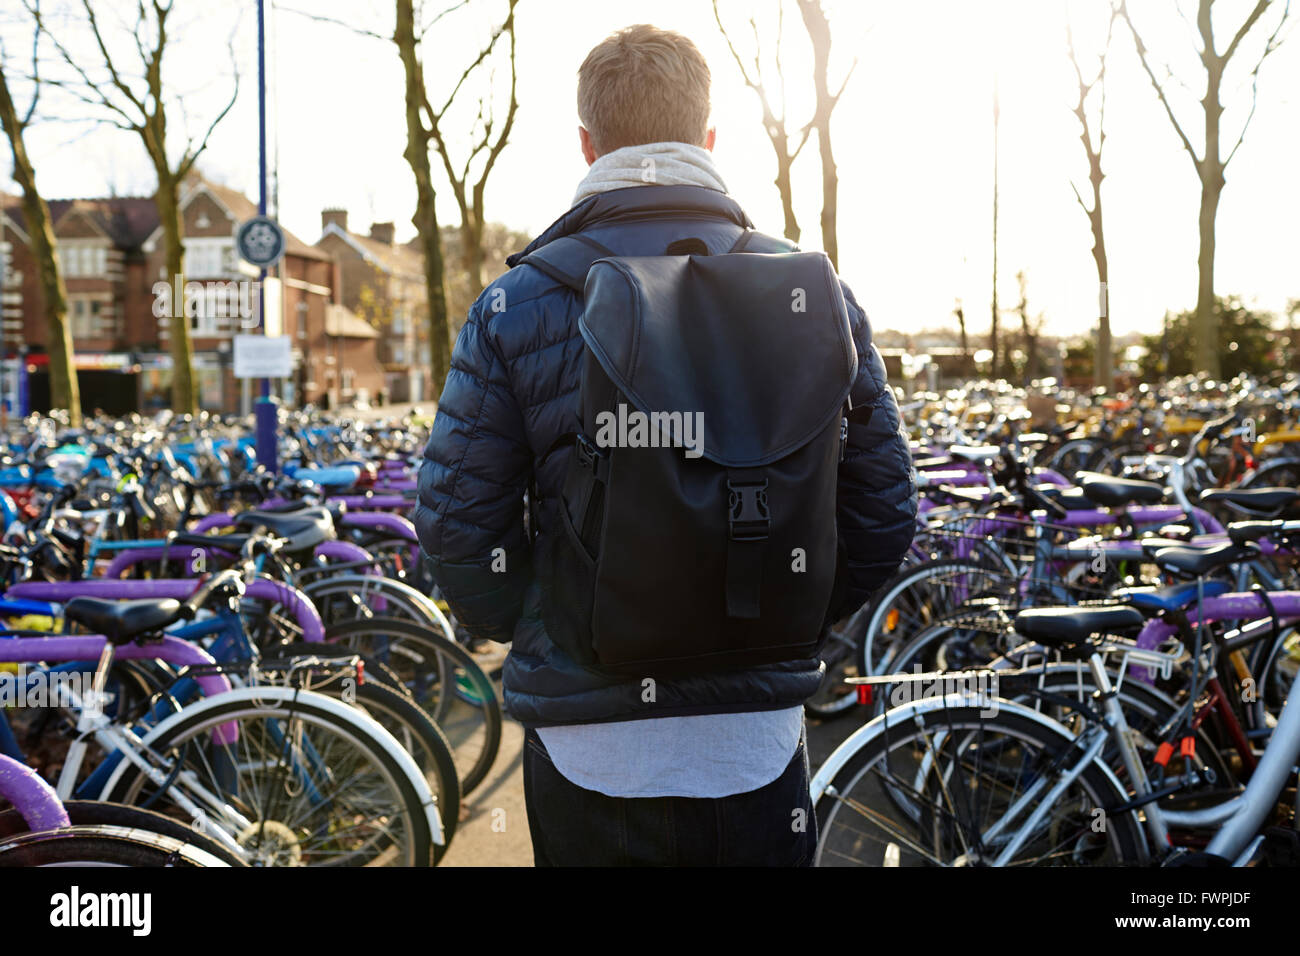 Rear View Of Man Leaving Bike In Cycle Park At Rail Station Stock Photo